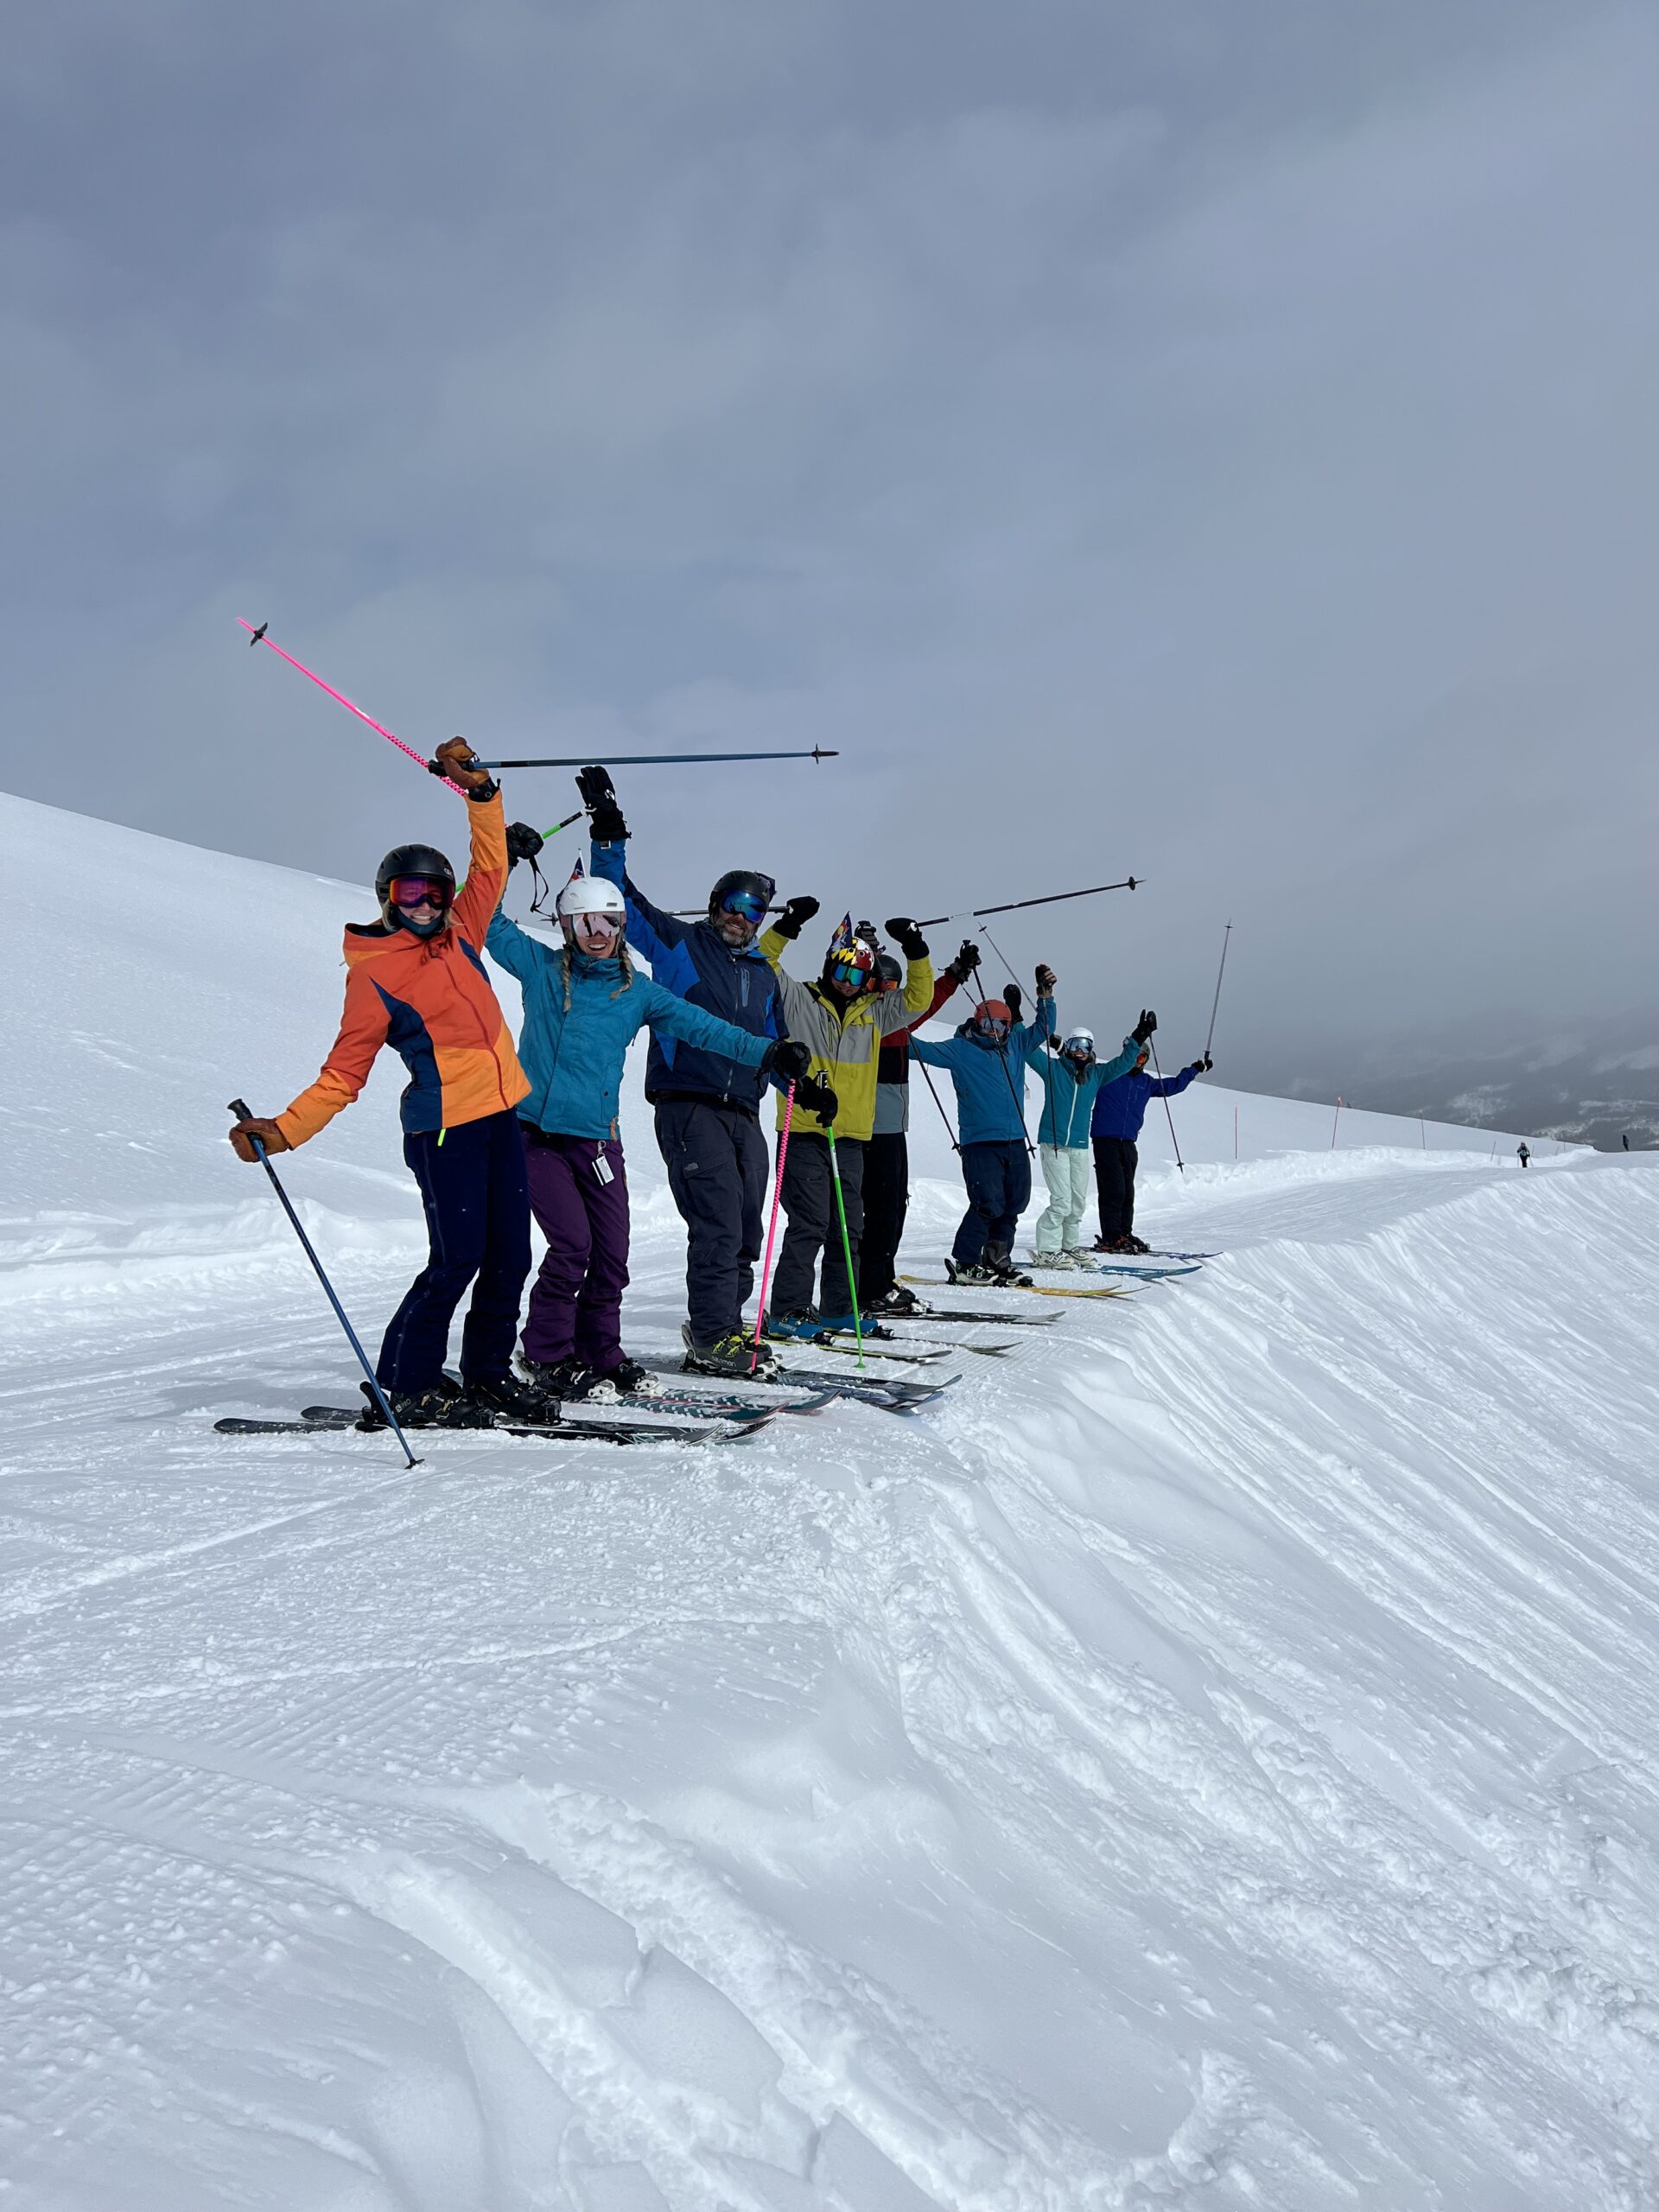 A group of people on skis on a snowy slope.